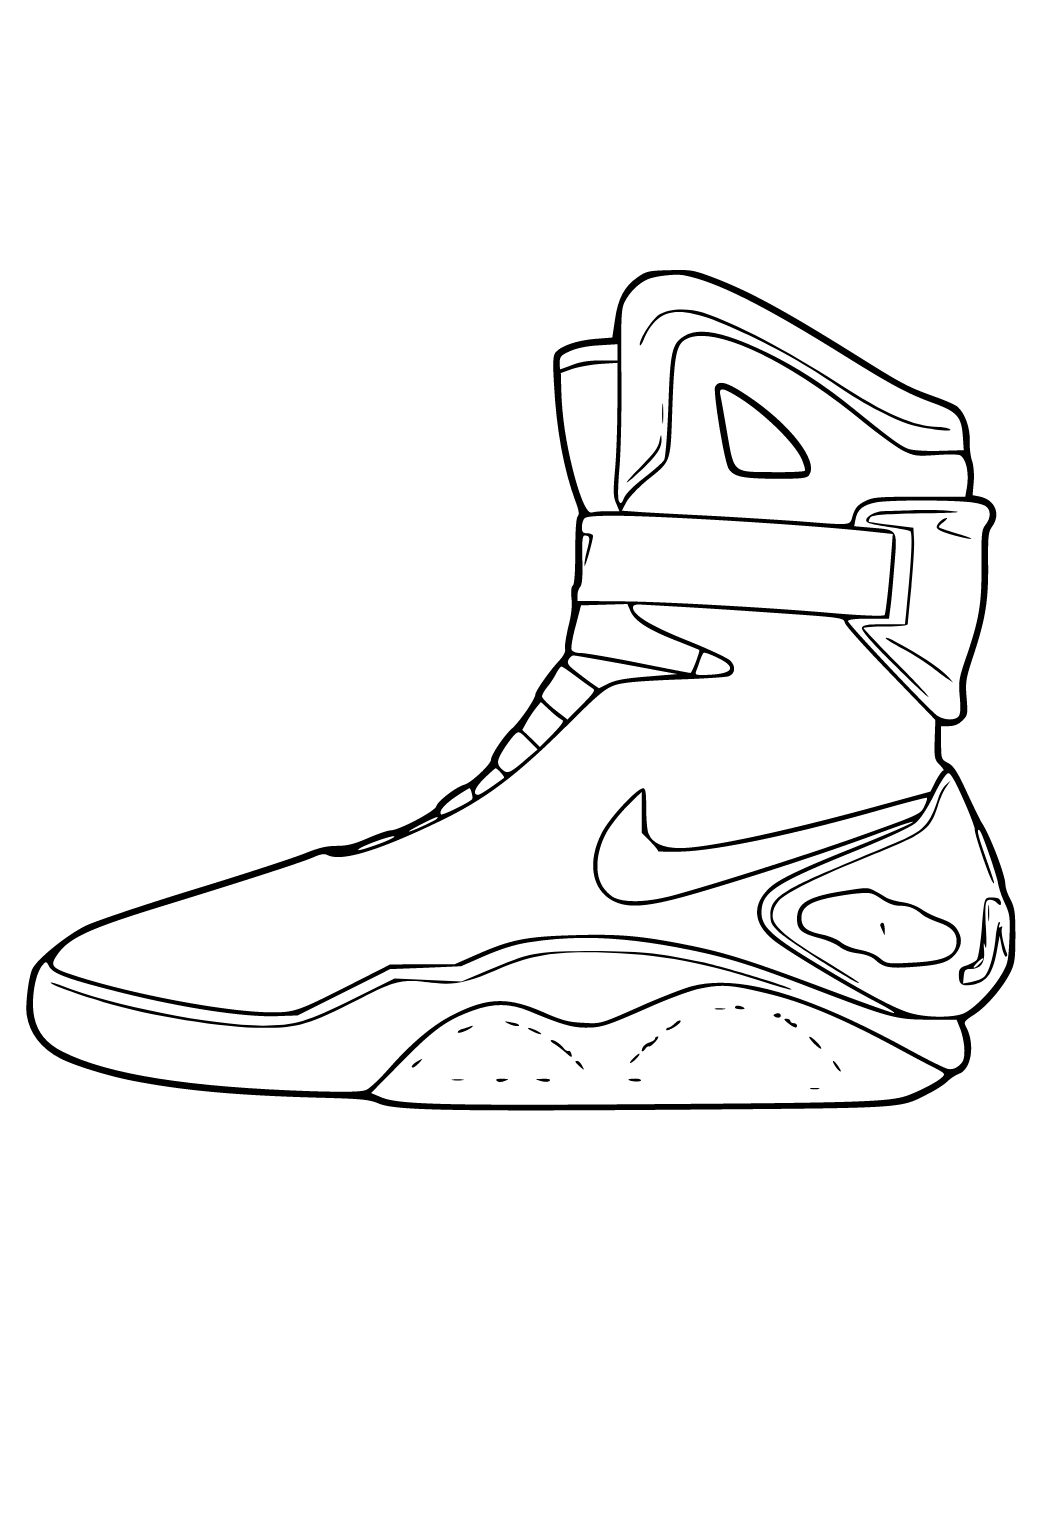 Free Printable Nike Clasp Coloring Page for Adults and Kids - Lystok.com